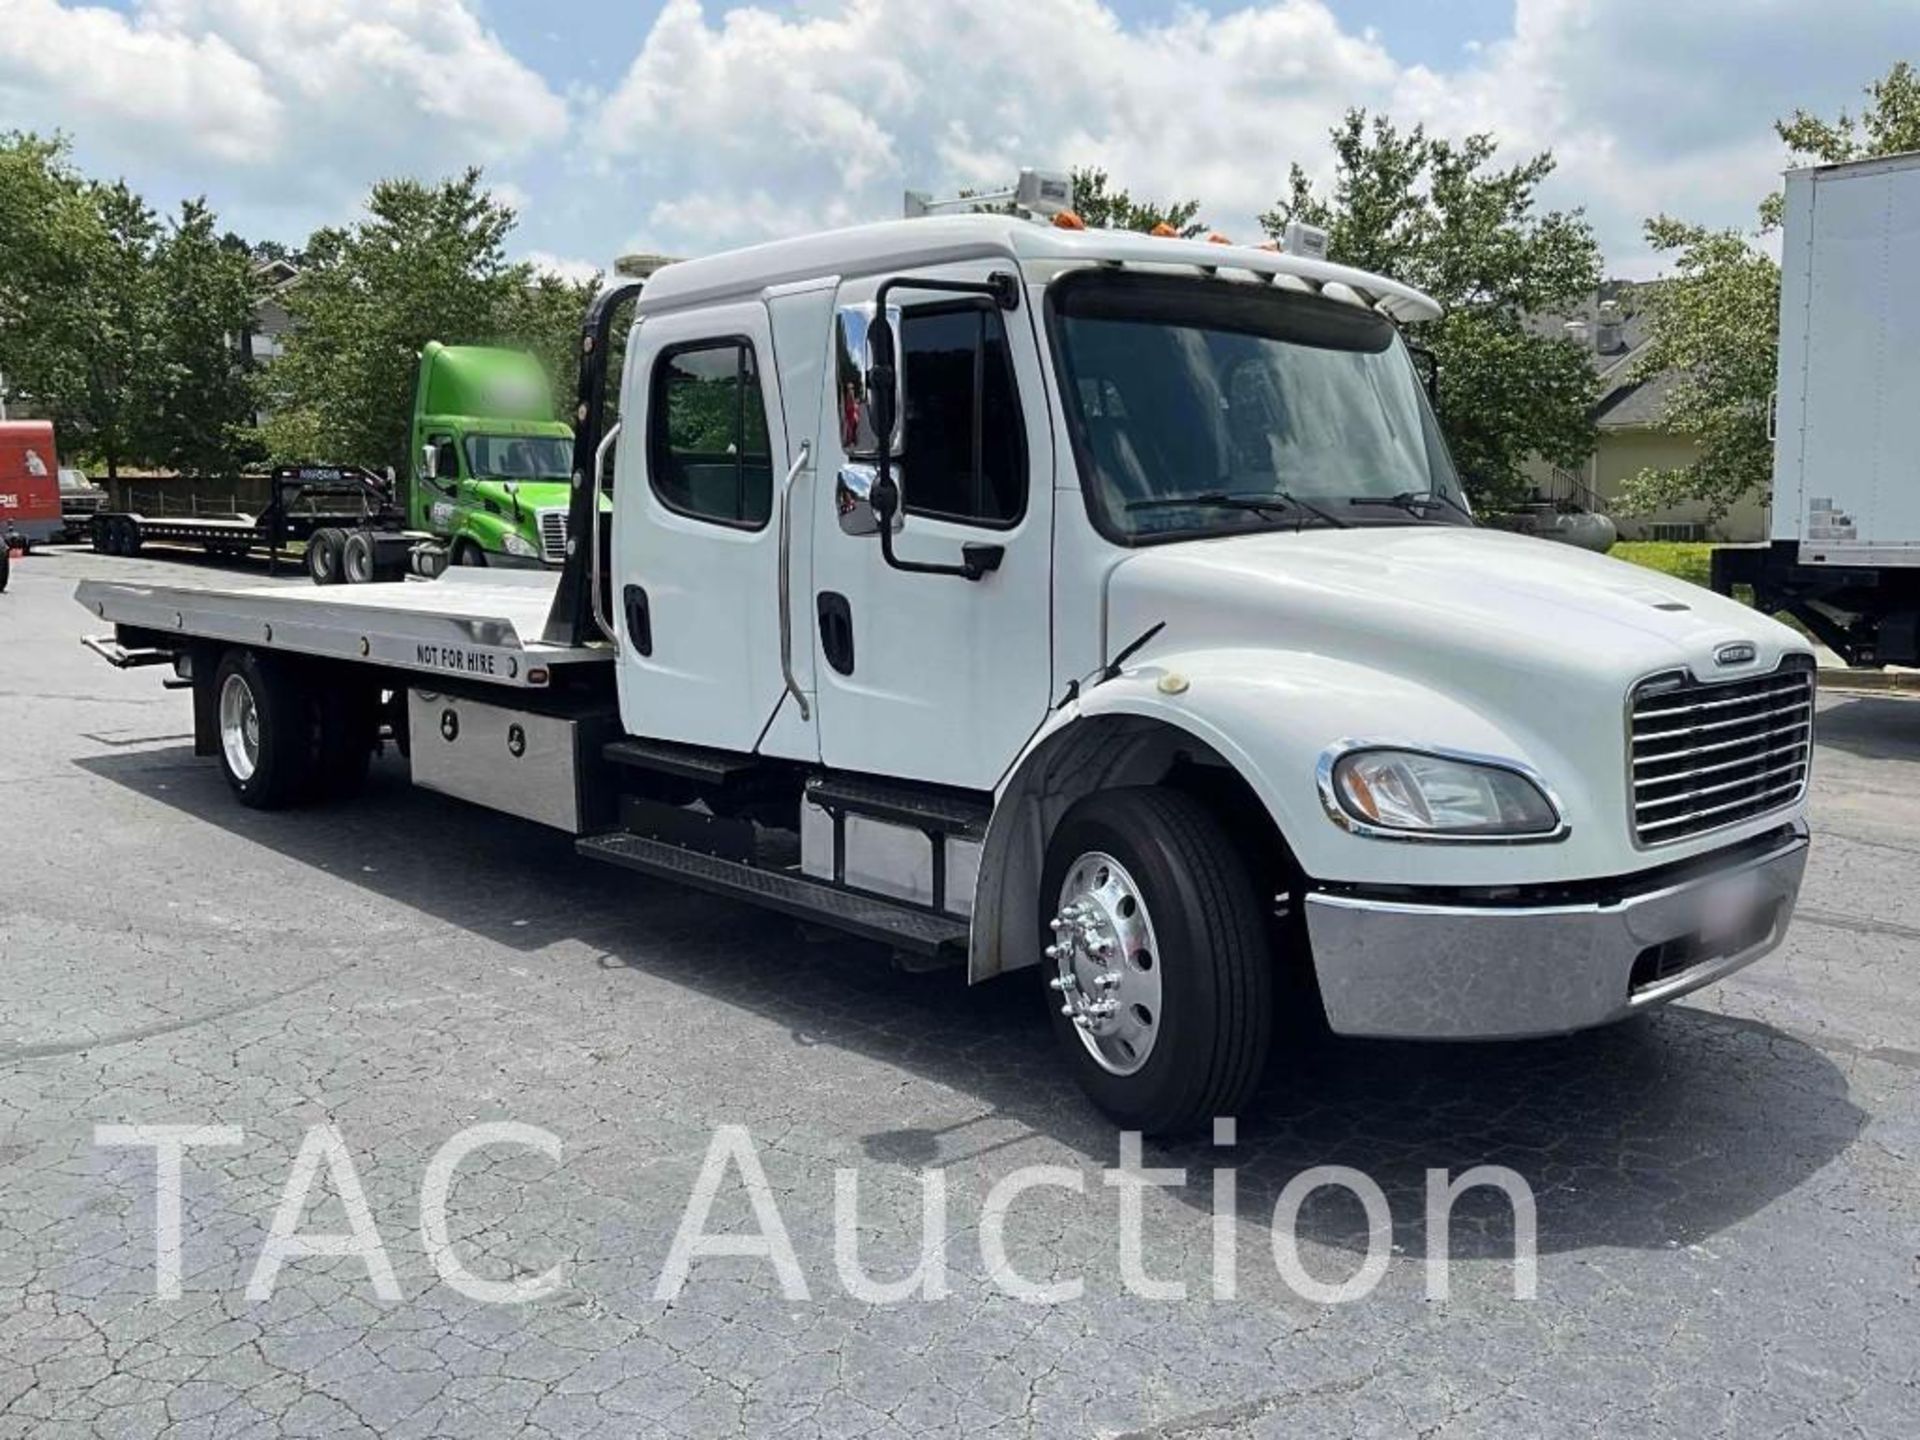 2014 Freightliner M2 Crew Cab Rollback Truck - Image 3 of 71